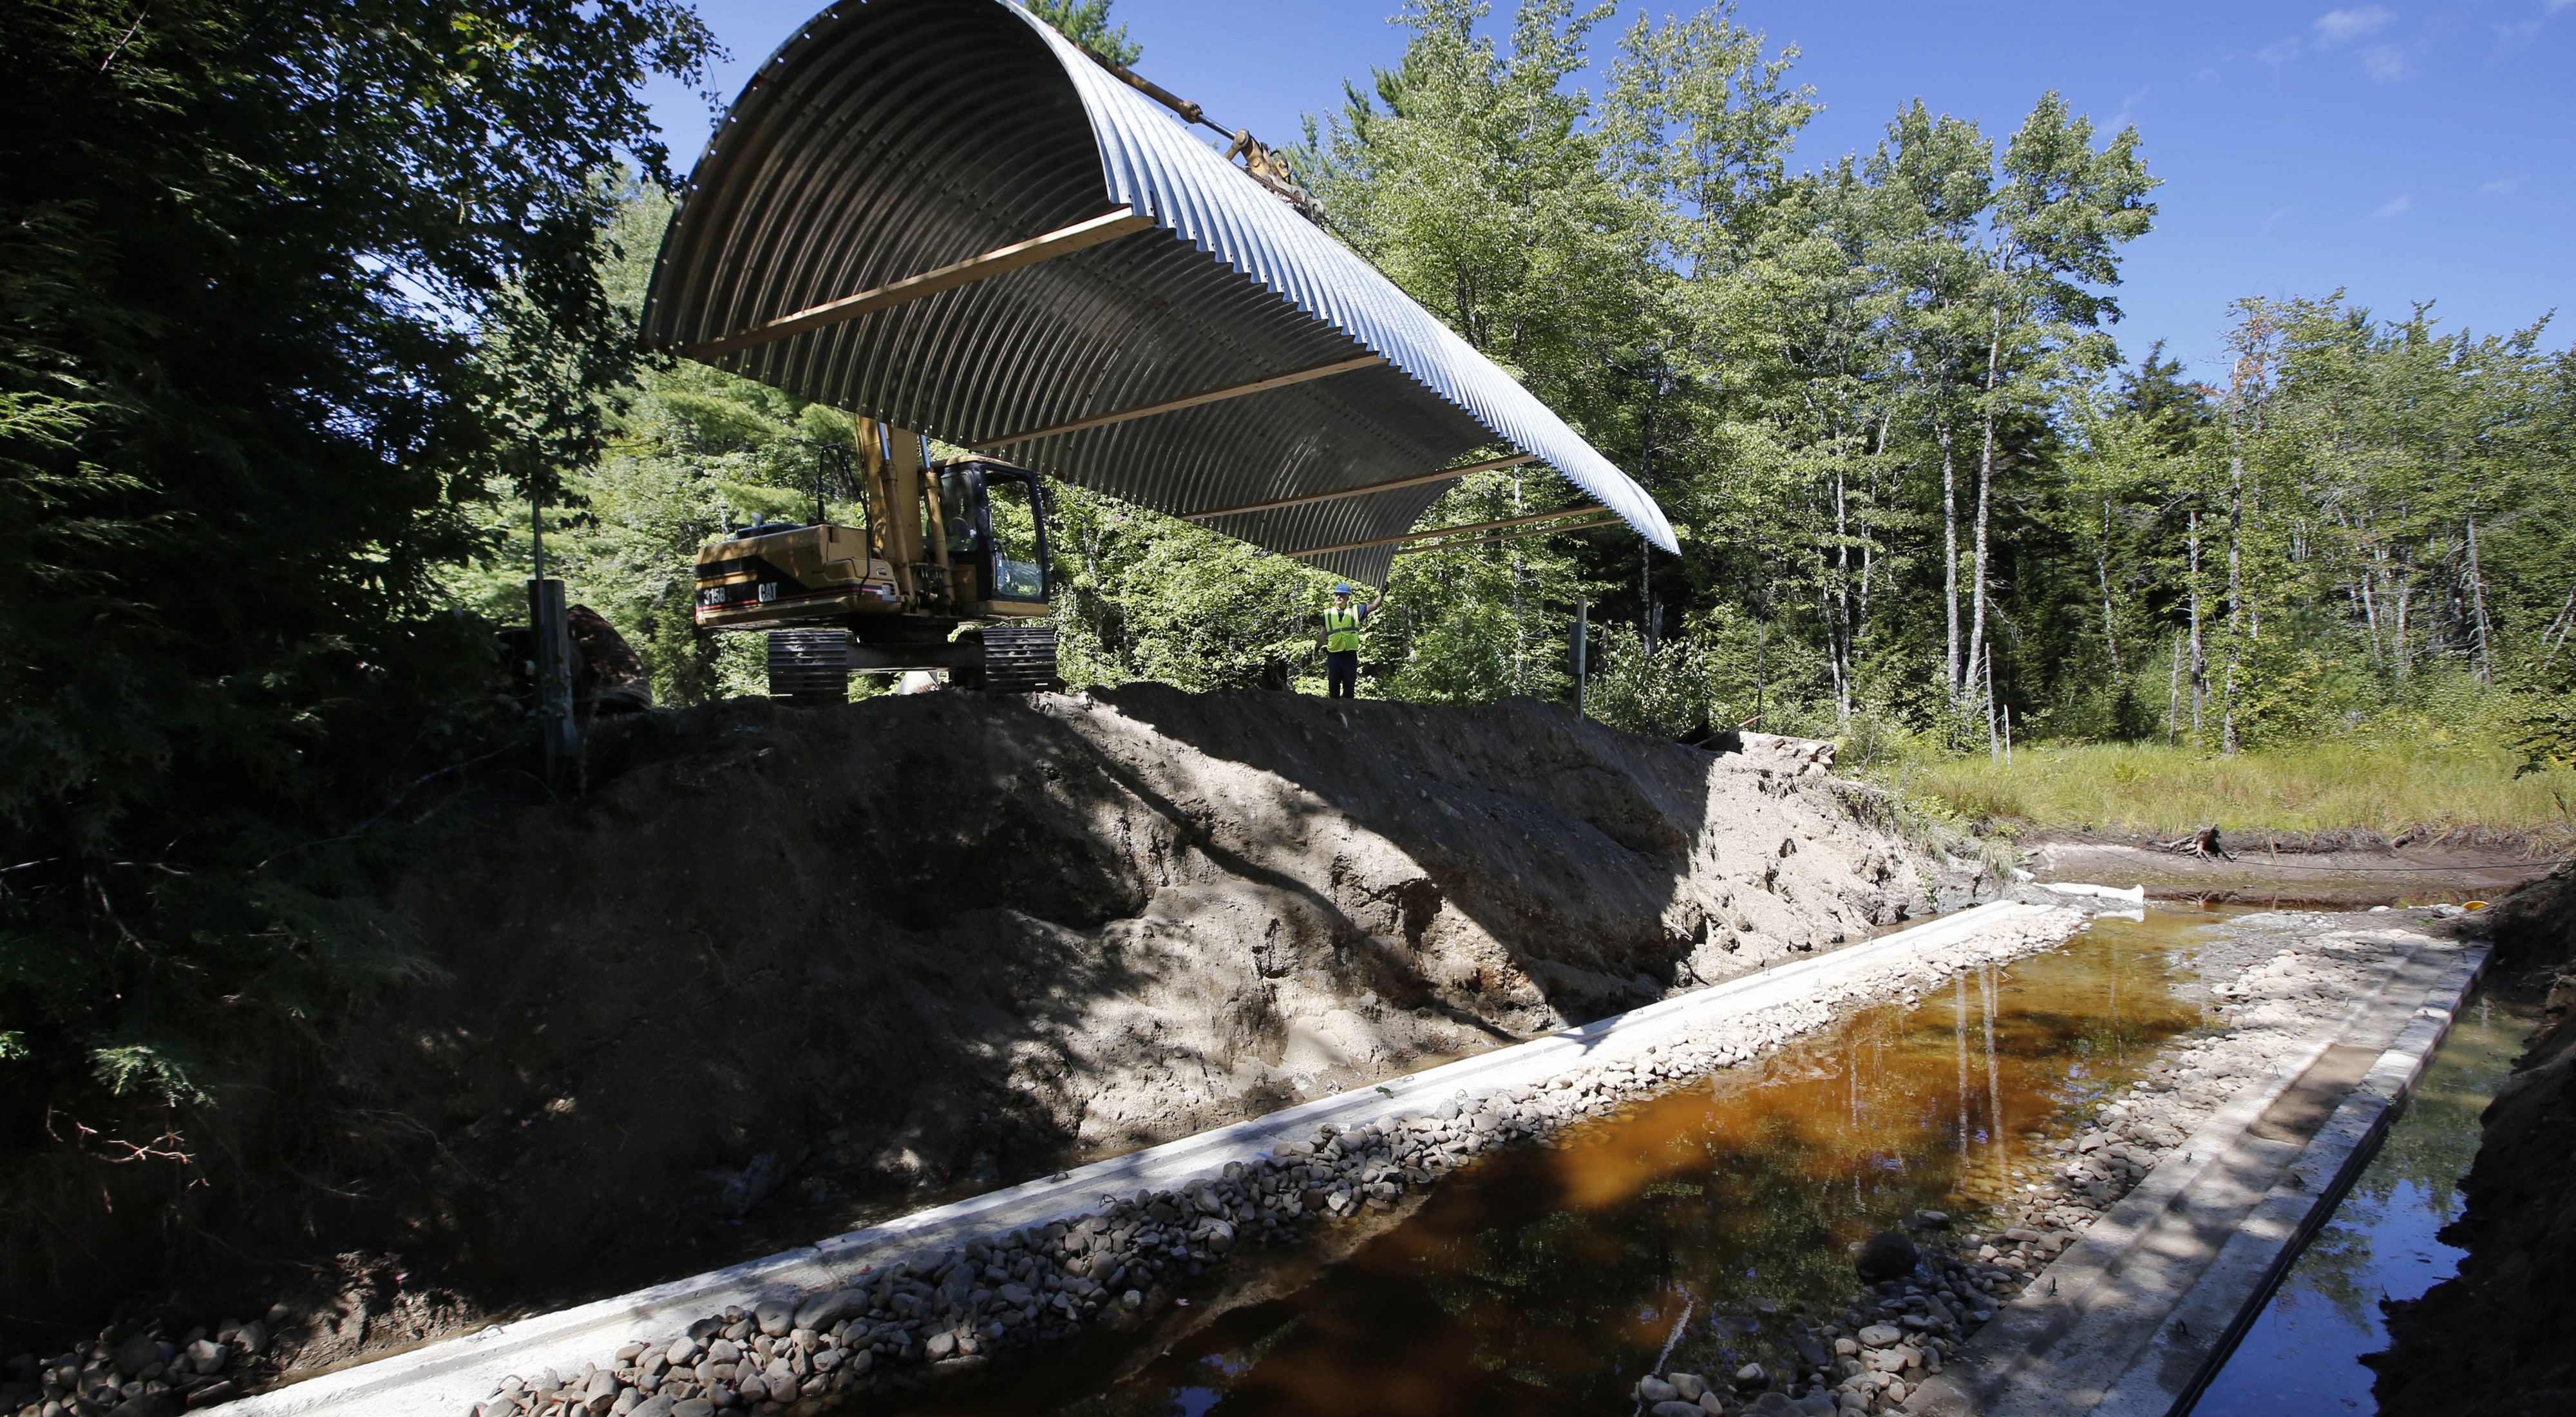 An arch culvert is lowered by backhoe to it's foundations straddling a river in Maine